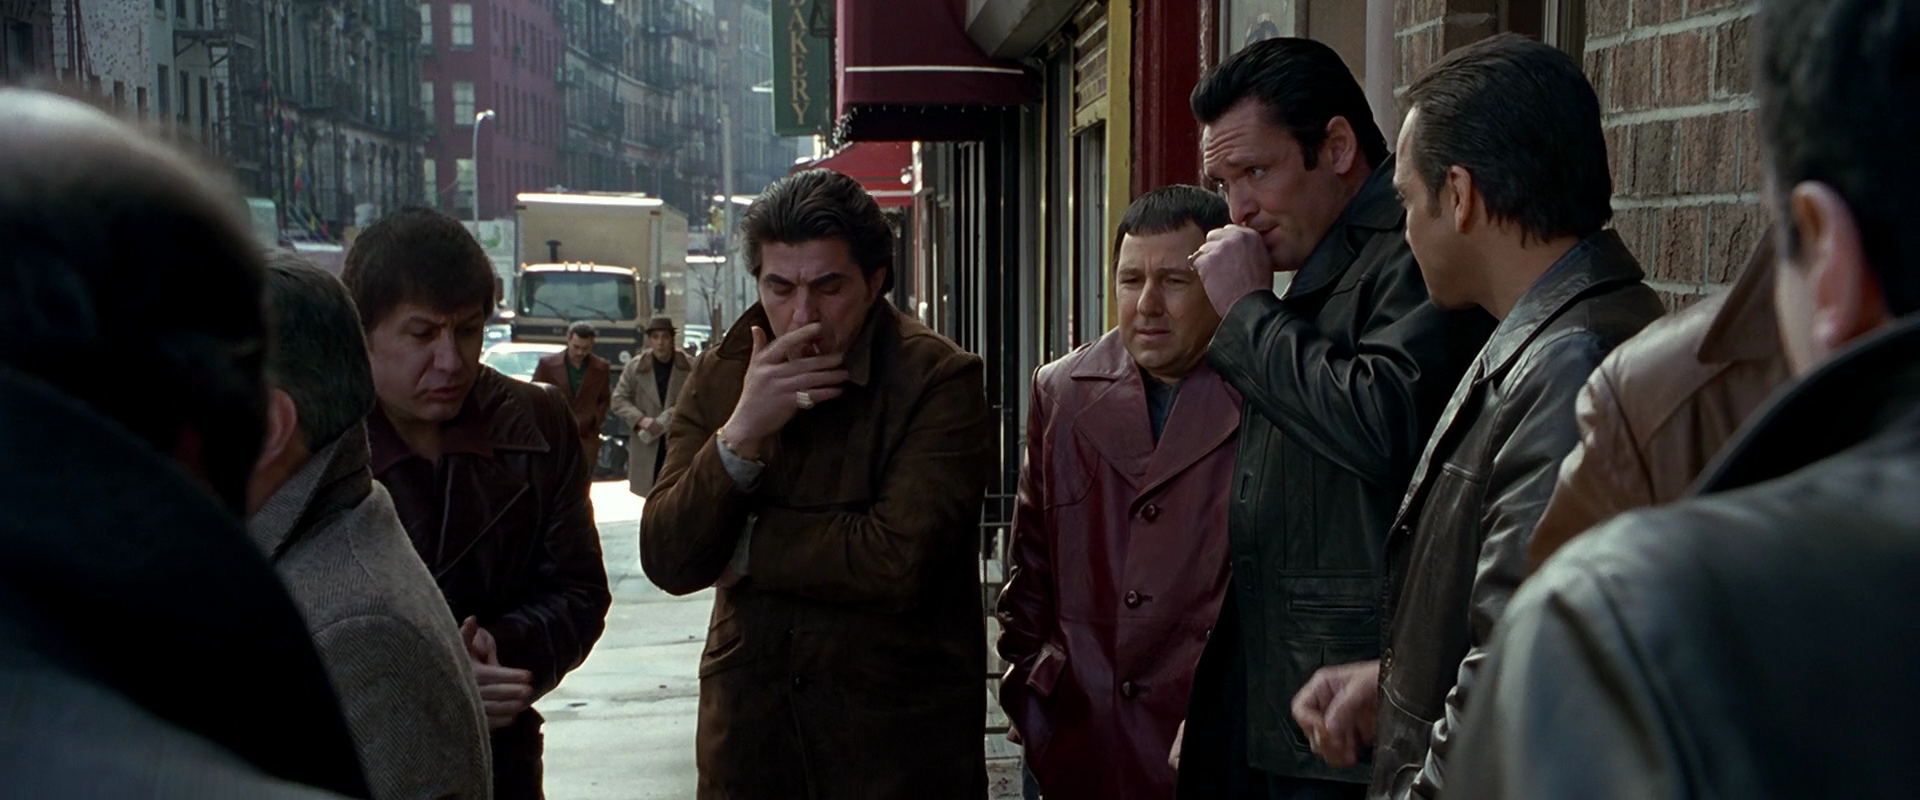 1920x800 > Donnie Brasco Wallpapers